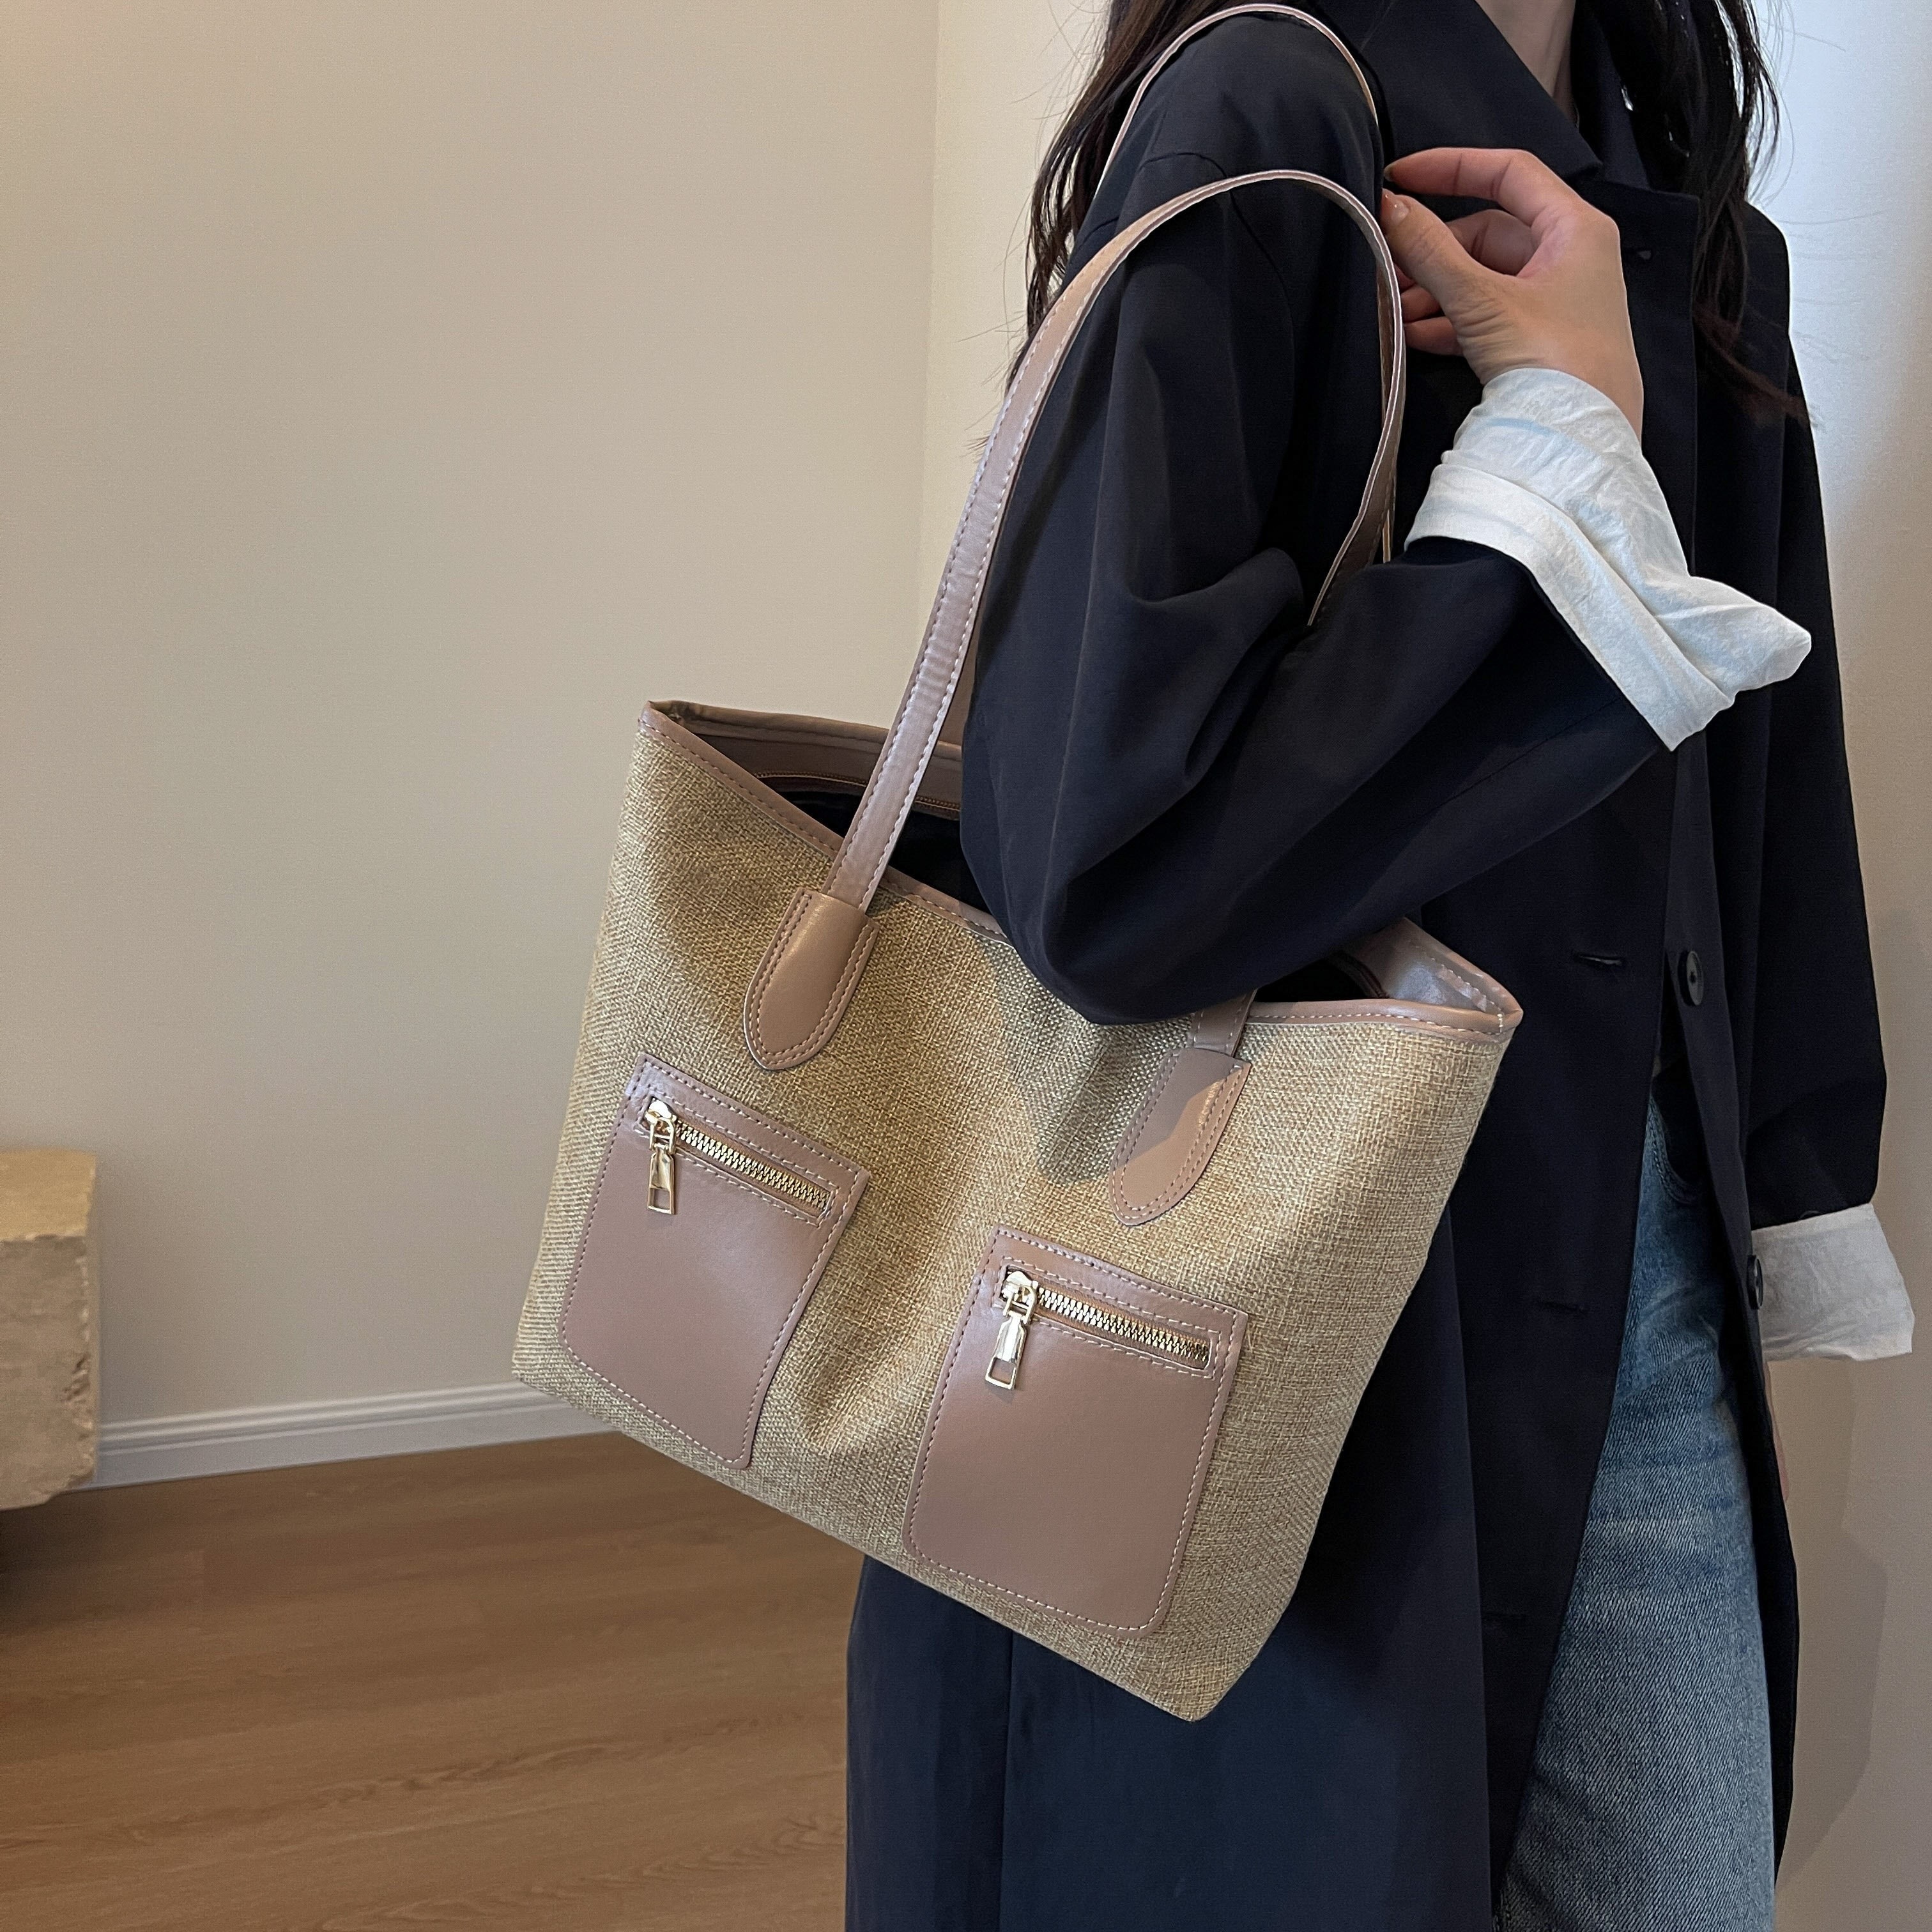 Hermes, Bags, New Picotin 8 223 Gold Hardware